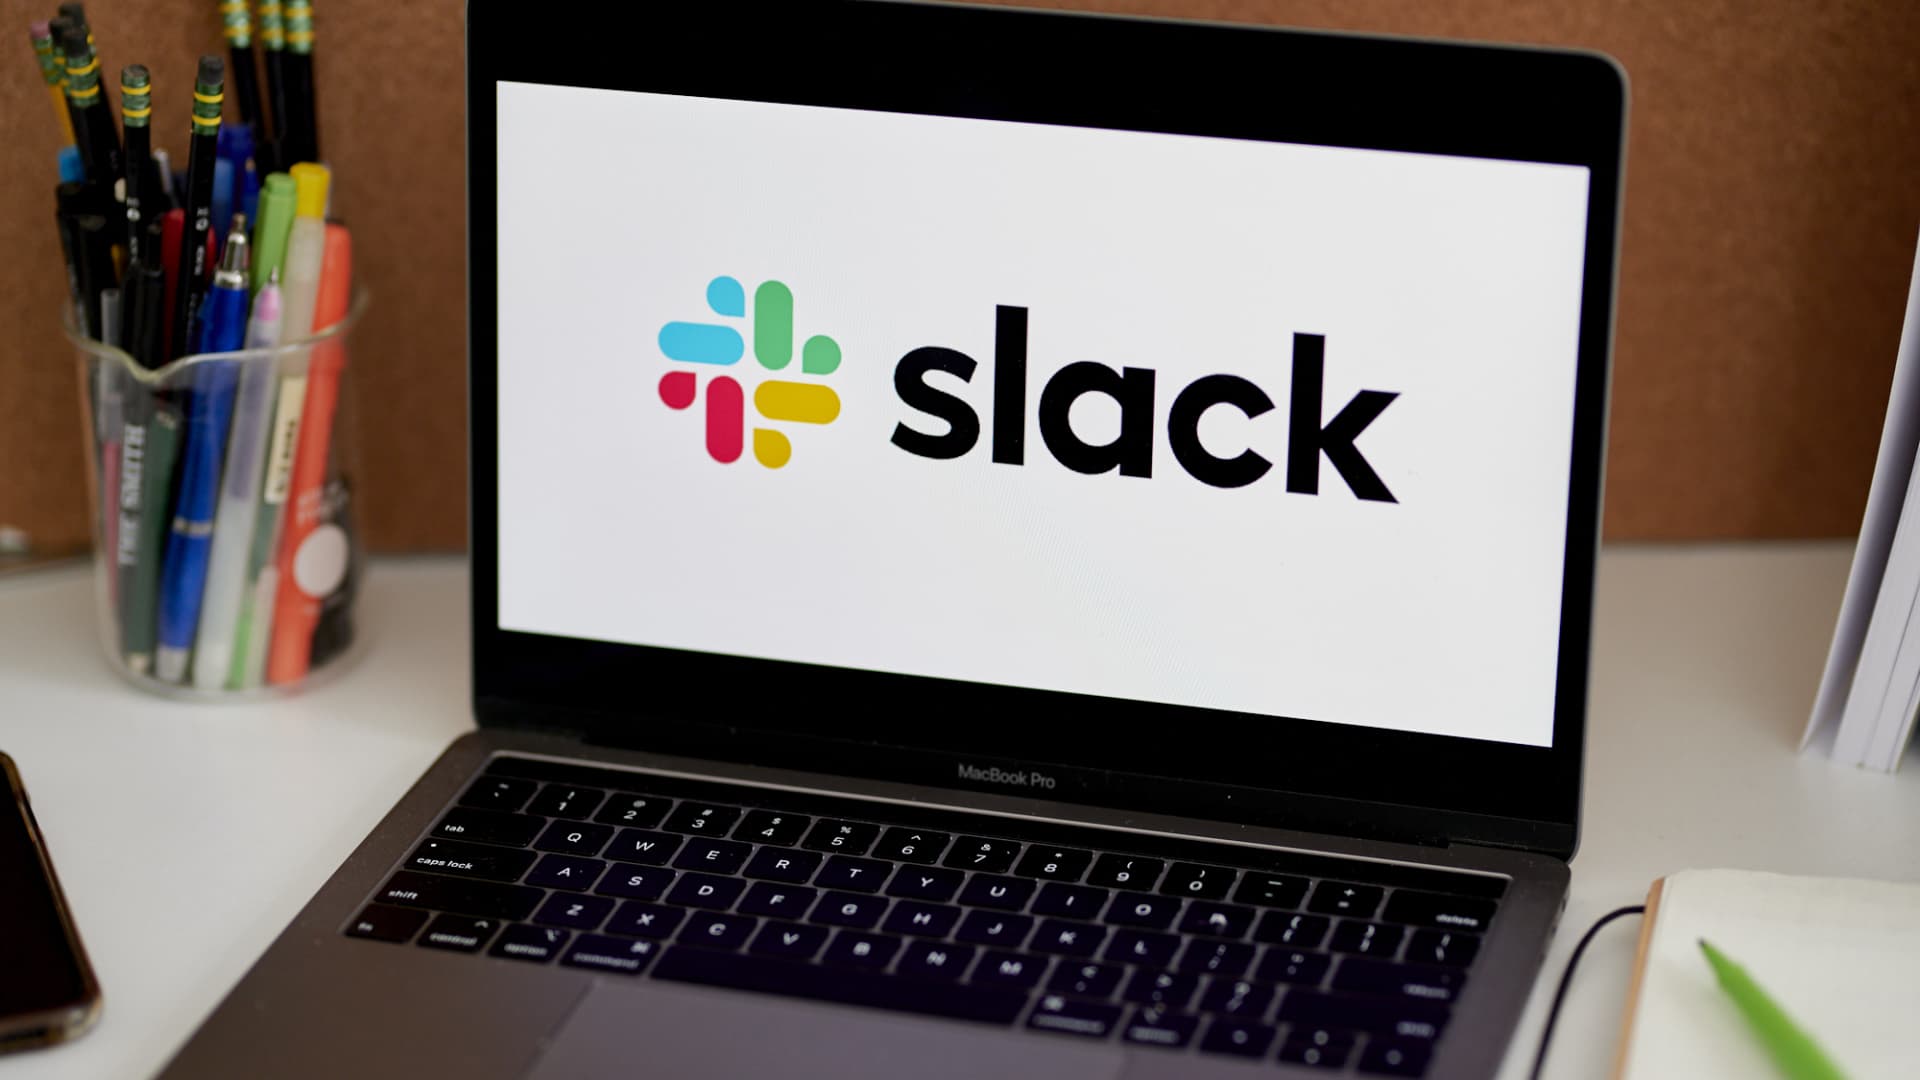 Salesforce-owned Slack says service restored after brief outage